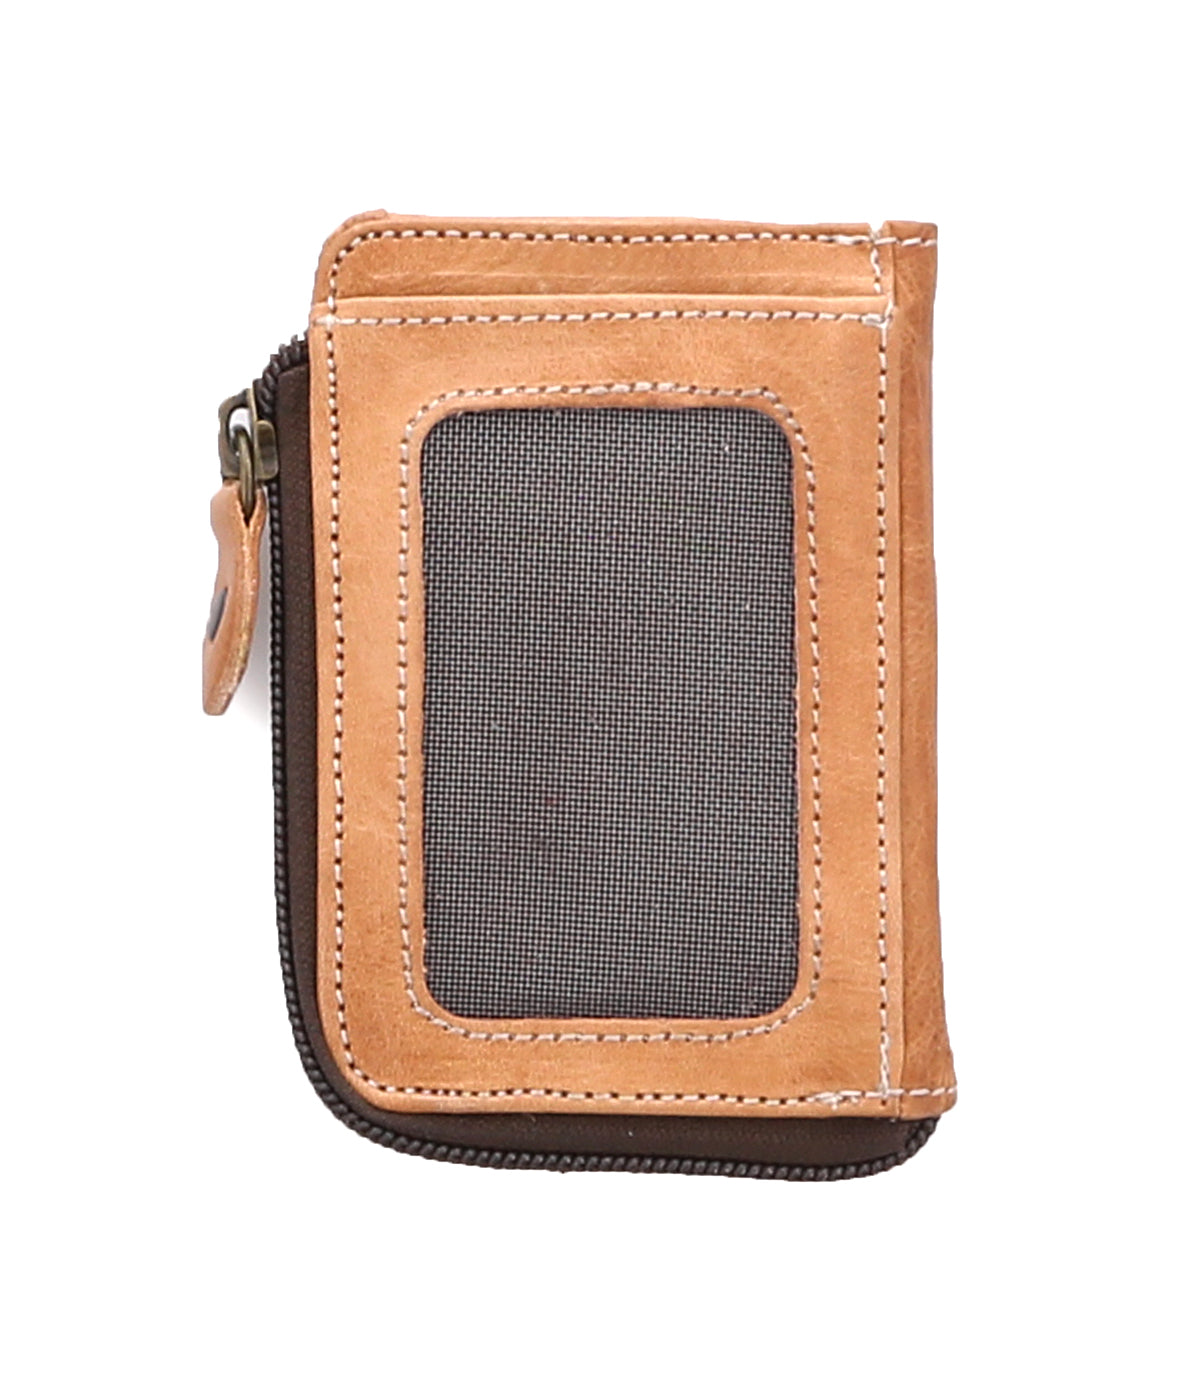 A Carrie tan leather wallet from Bed Stu, with a zipper, perfect for carrying your essentials.